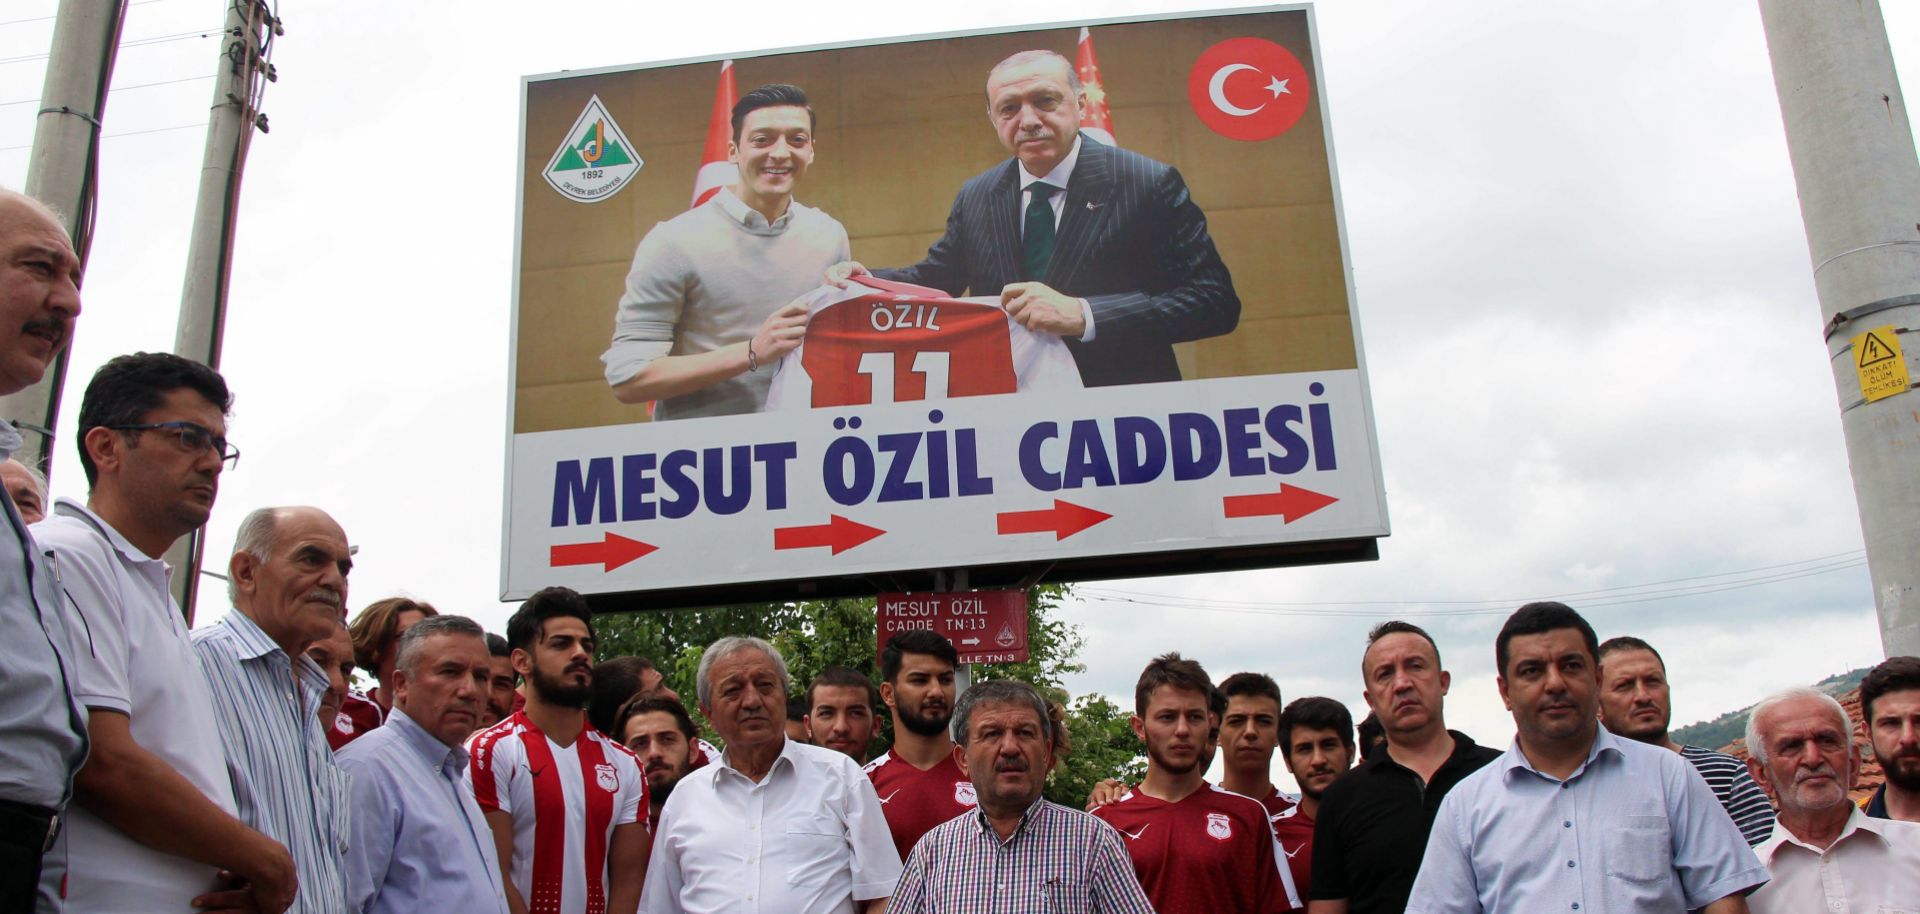 The Turkish city of Zonguldak used a photo of German soccer star Mesut Ozil posing with President Recep Tayyip Erdogan during a ceremony in which a city street was named for the footballer, who has Turkish ancestry.